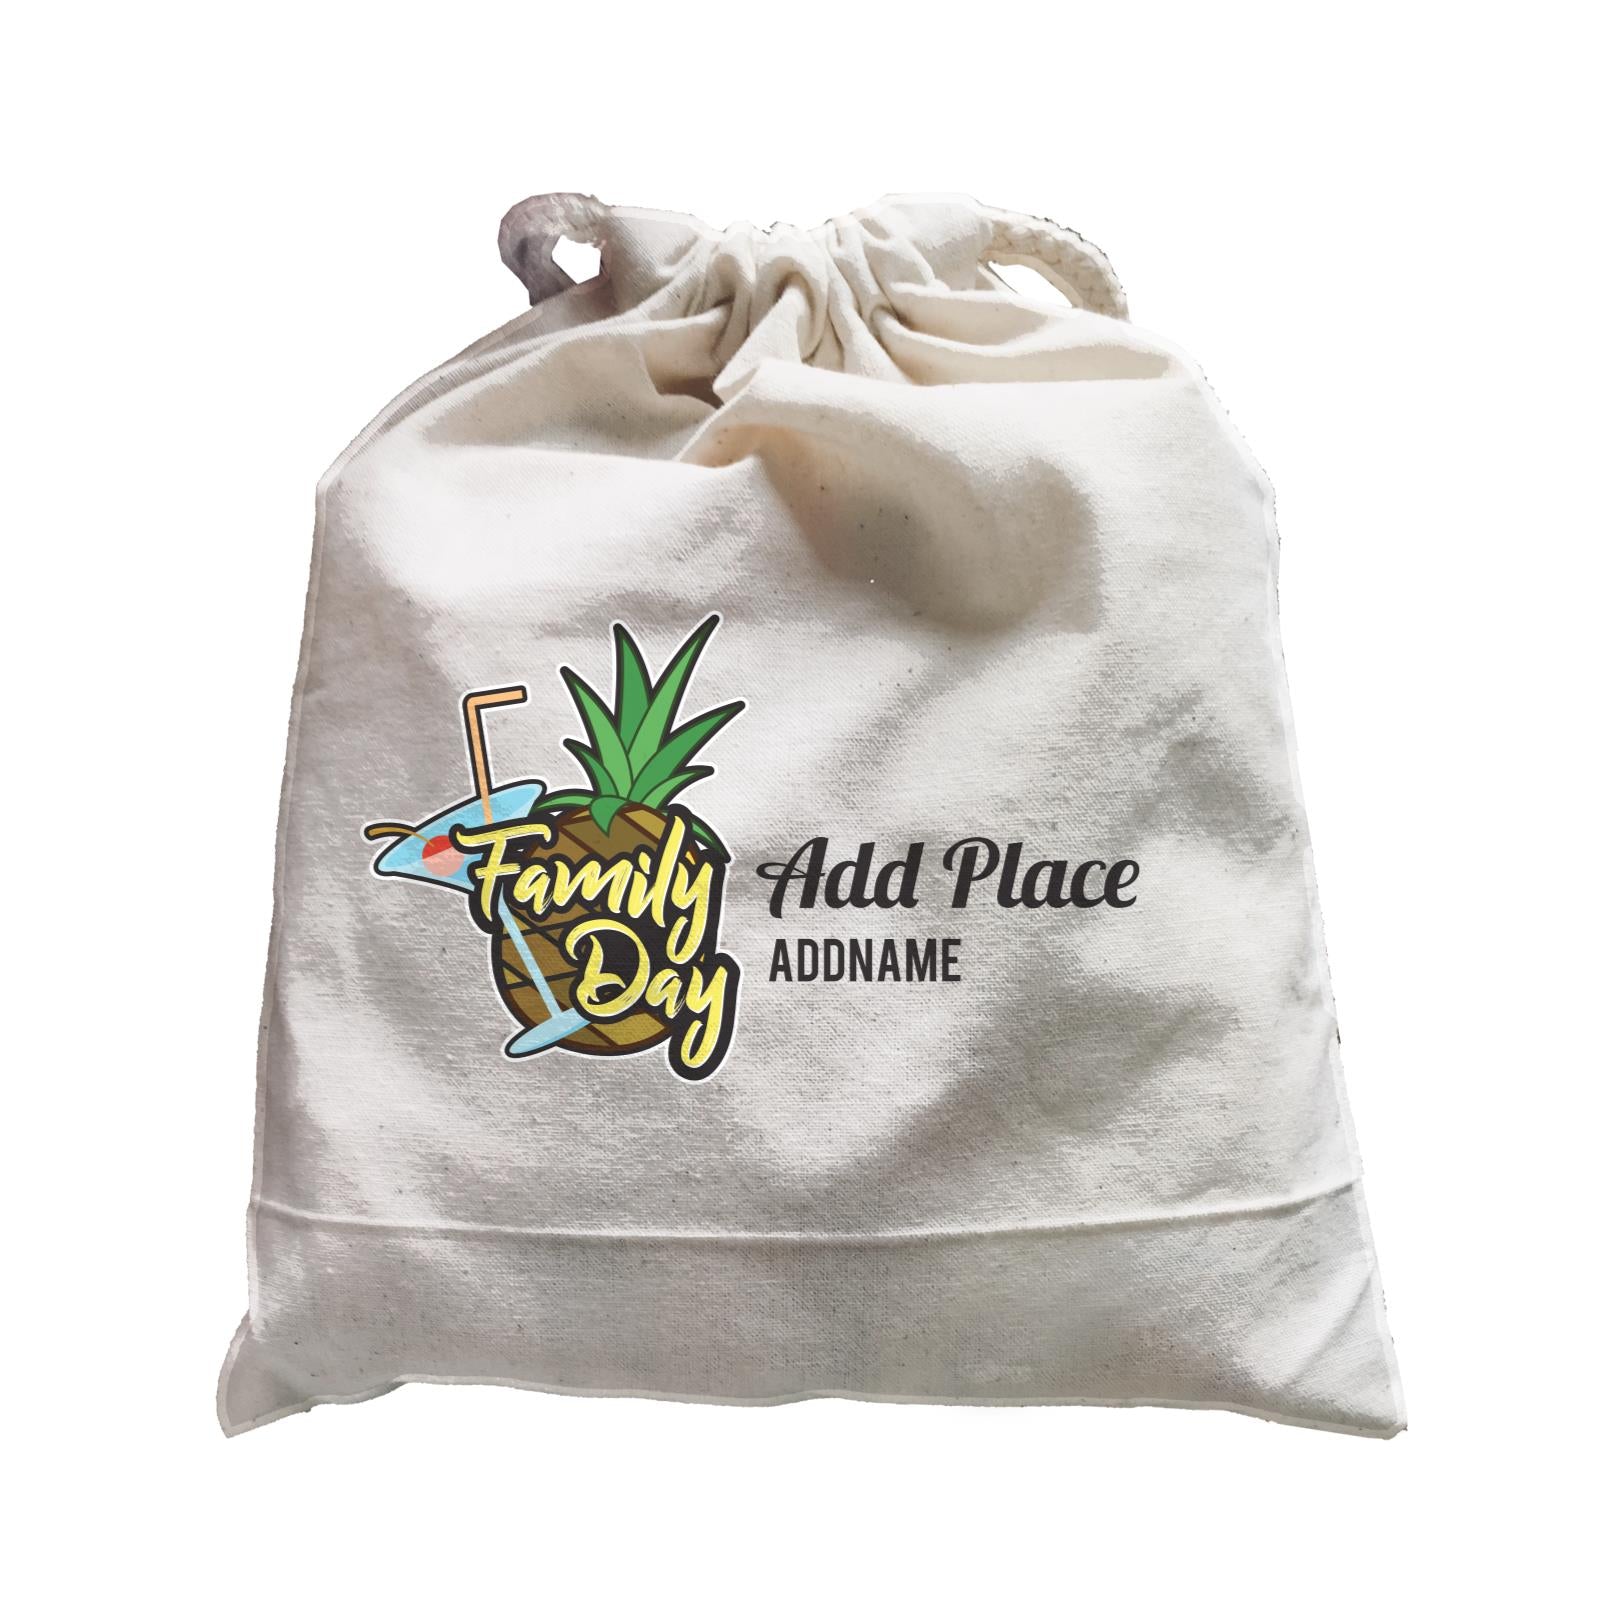 Family Day Tropical Pineapple Family Day Addname And Add Place Accessories Satchel